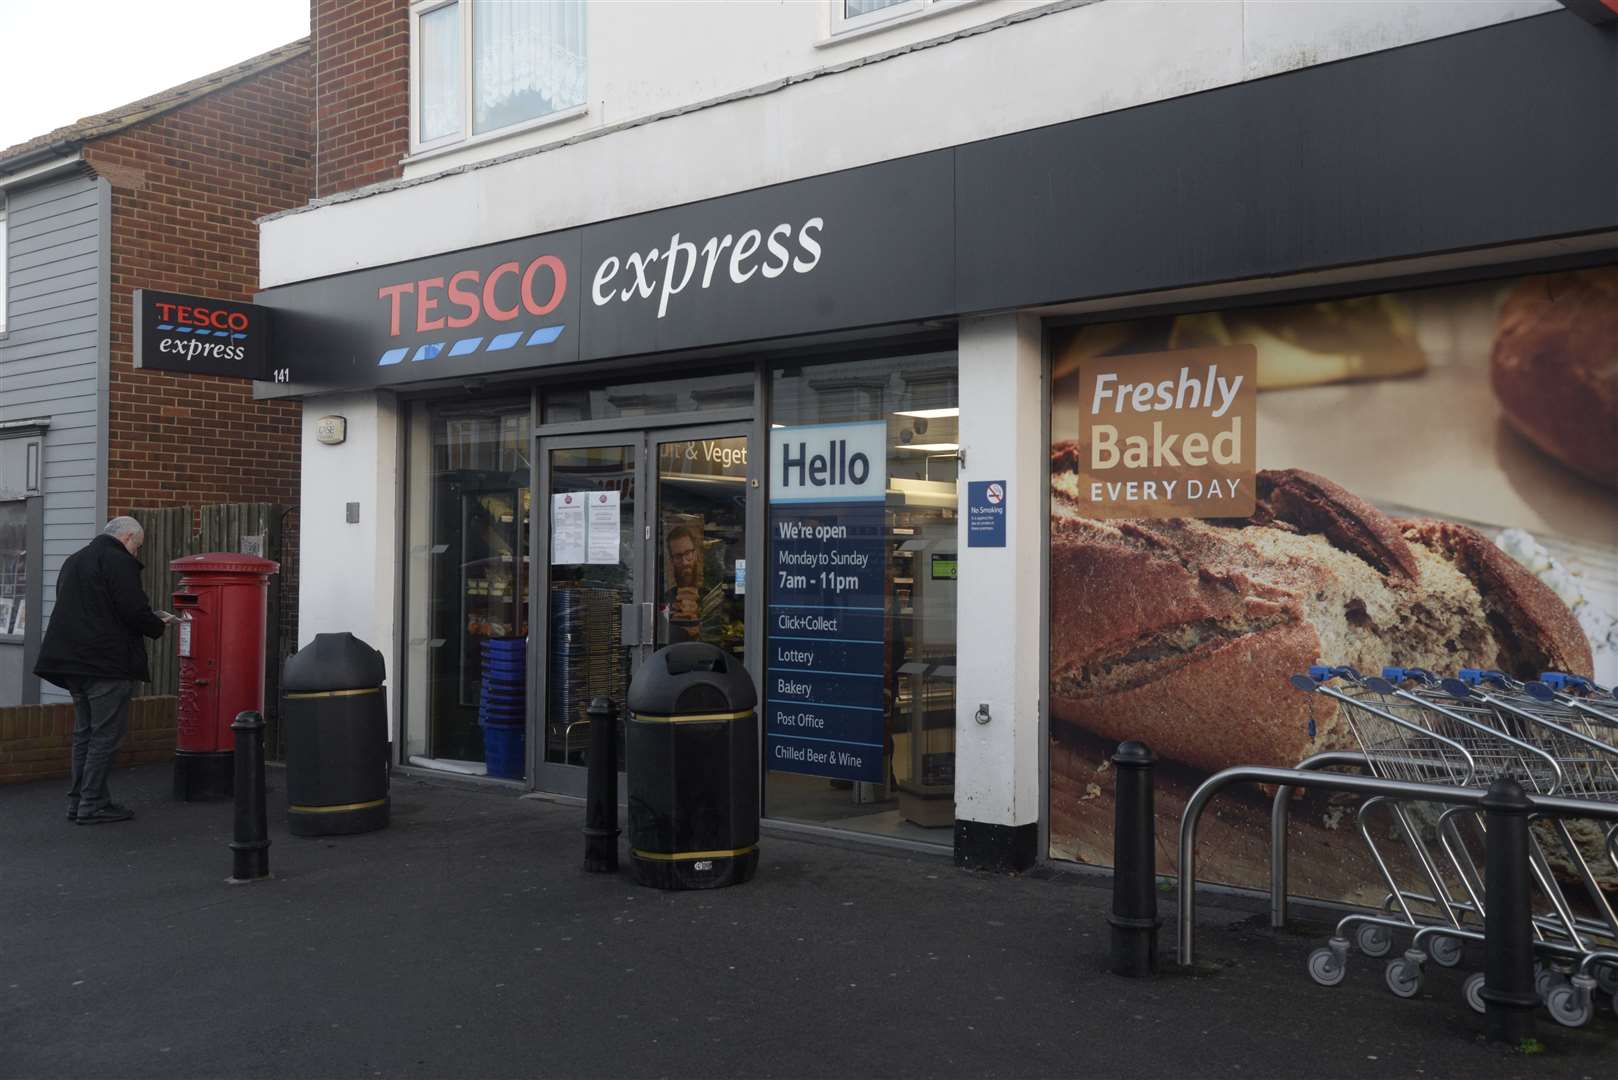 The Tesco Express in Tankerton. Picture: Chris Davey